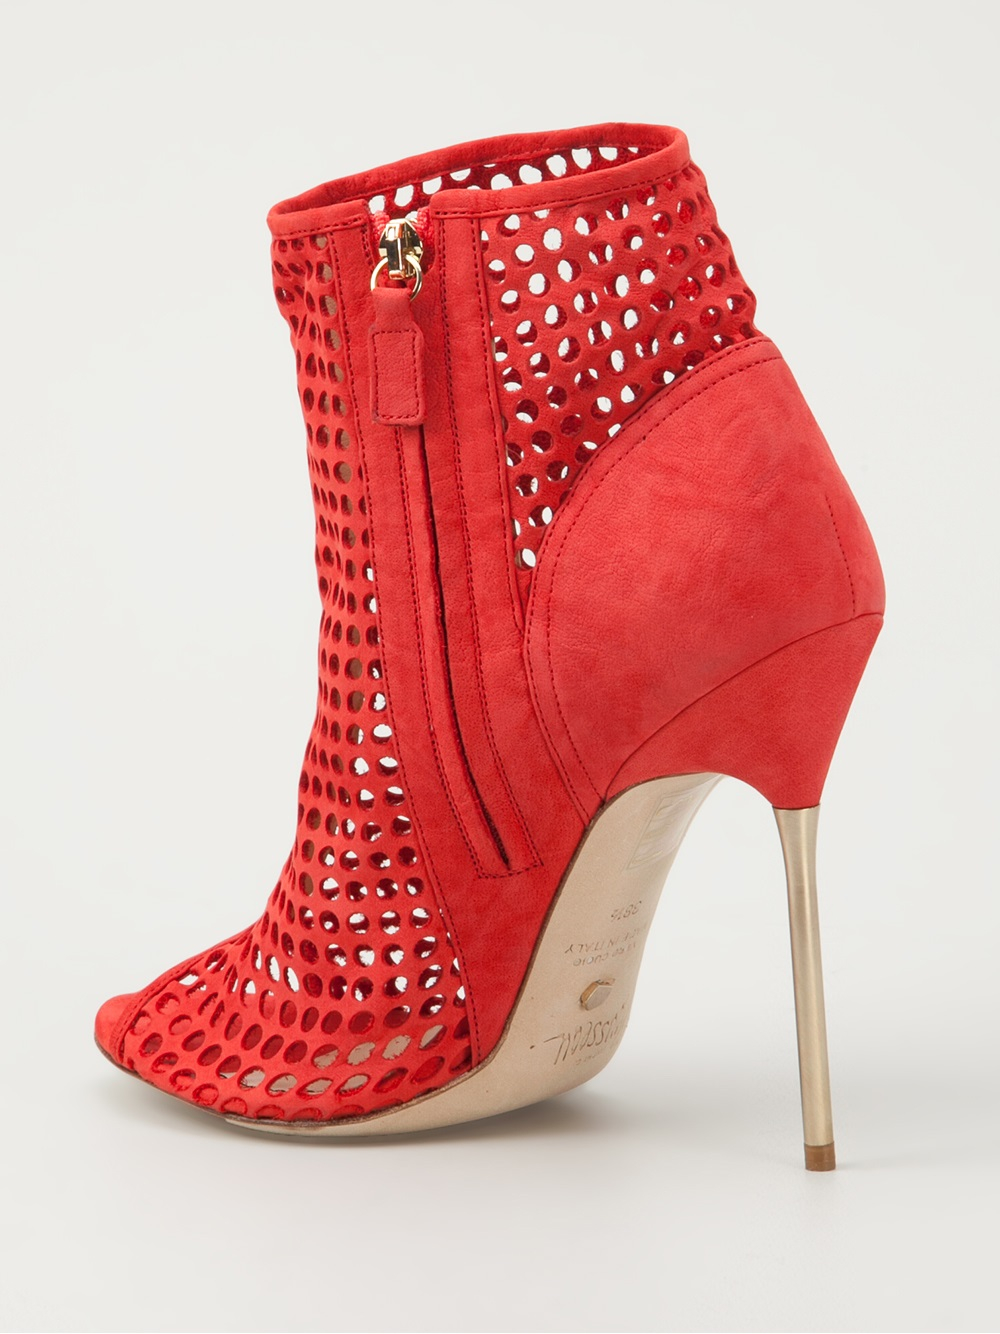 Lyst - Jerome c. rousseau Addict Boots in Red